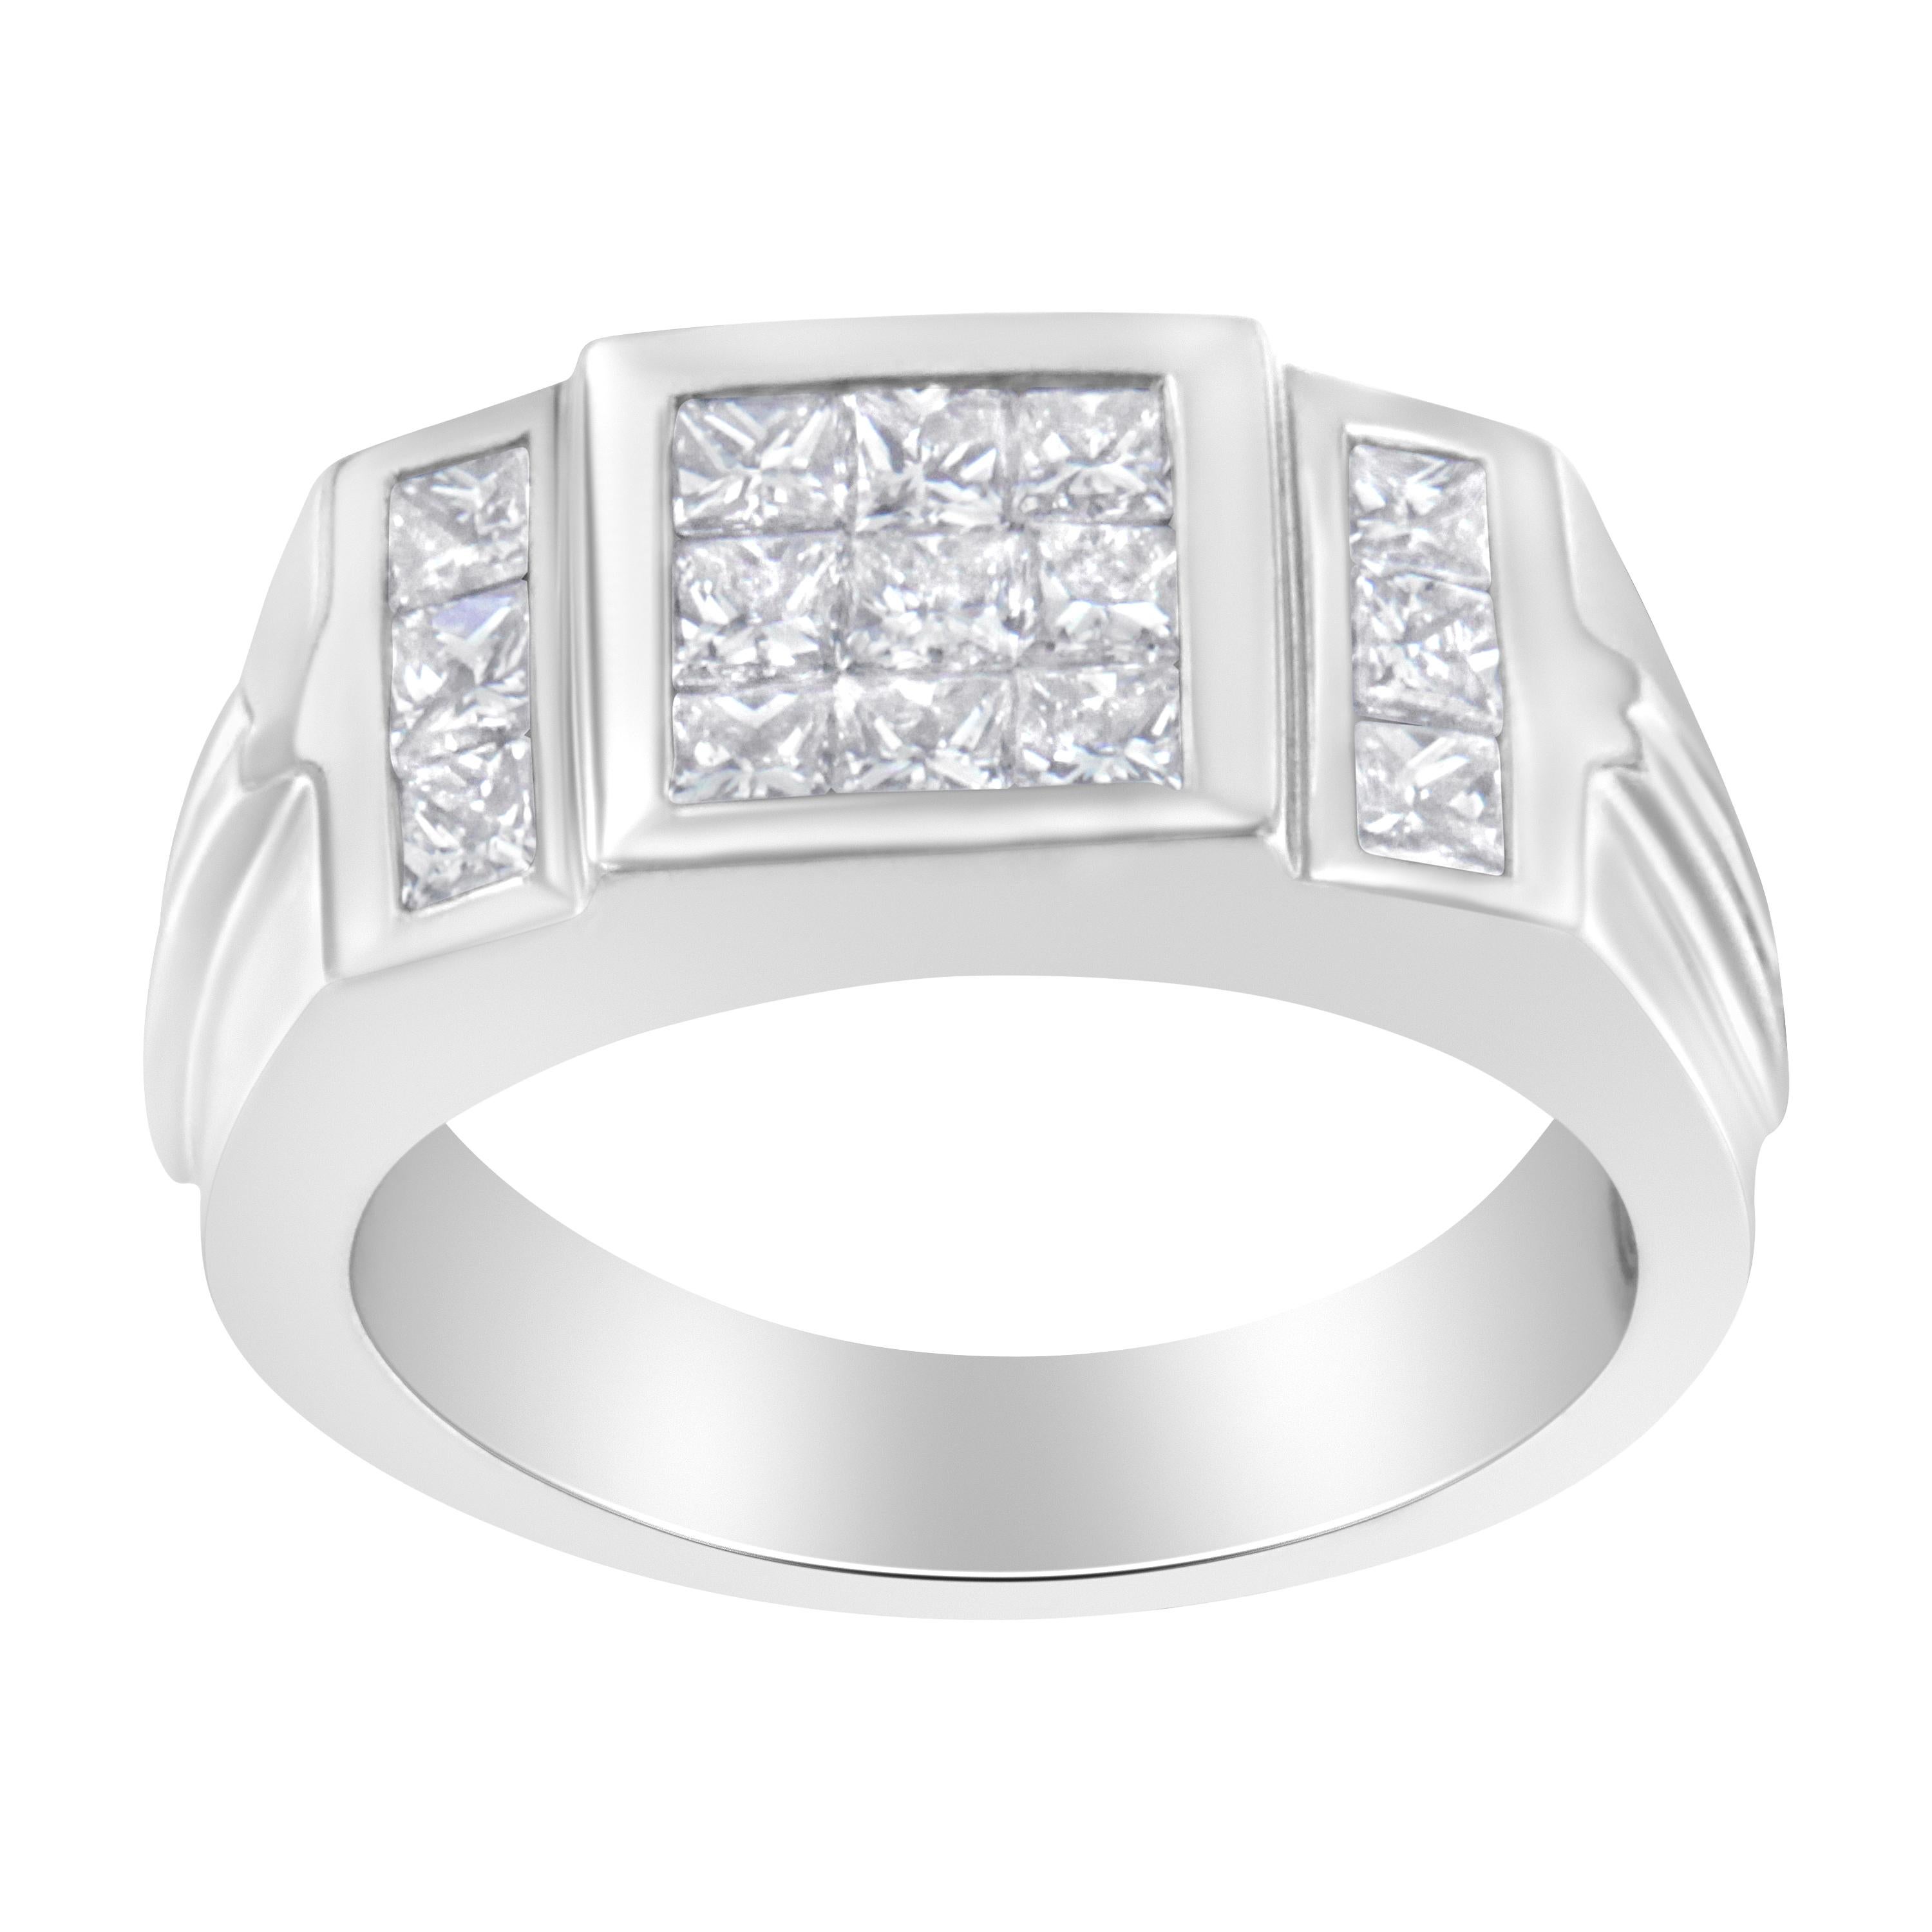 Your love for him will radiate in this unique and stylish diamond ring. Classy and appealing, the ring is created with 14 karats white gold and buffed high to shine brilliantly. It captures the gleaming princess cut diamonds that makes this ring to